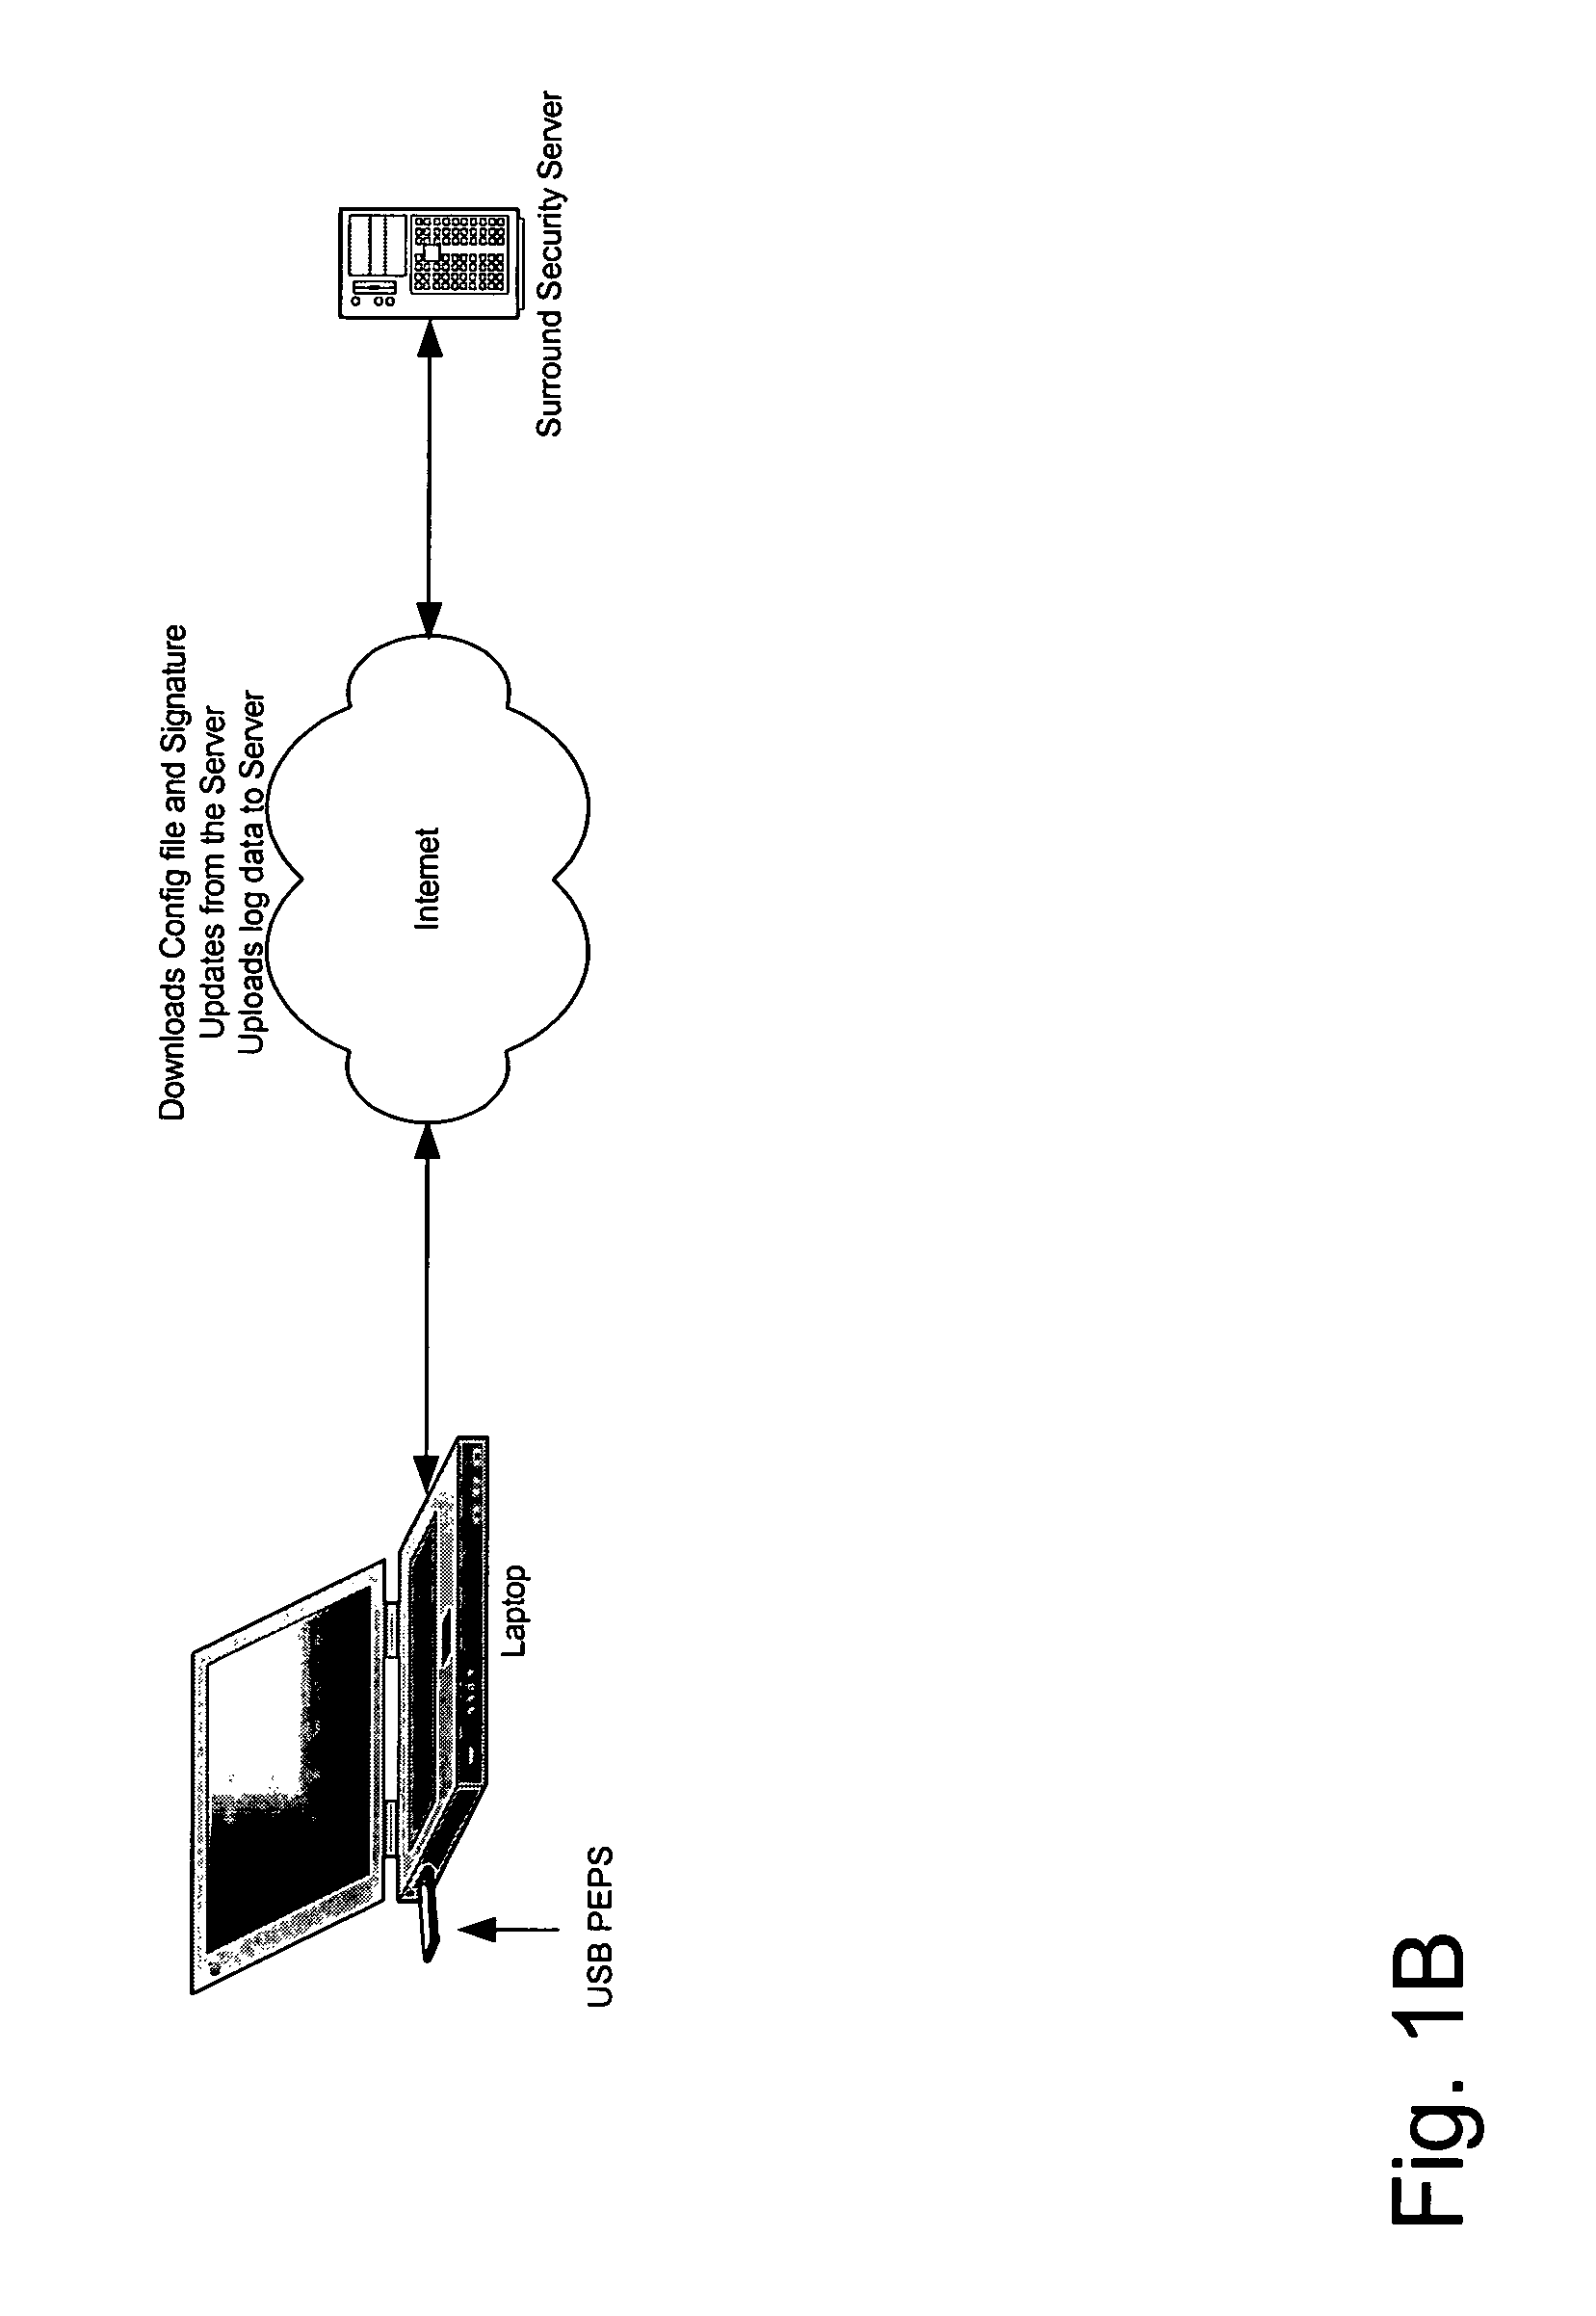 Method and apparatus for creating a secure anywhere system